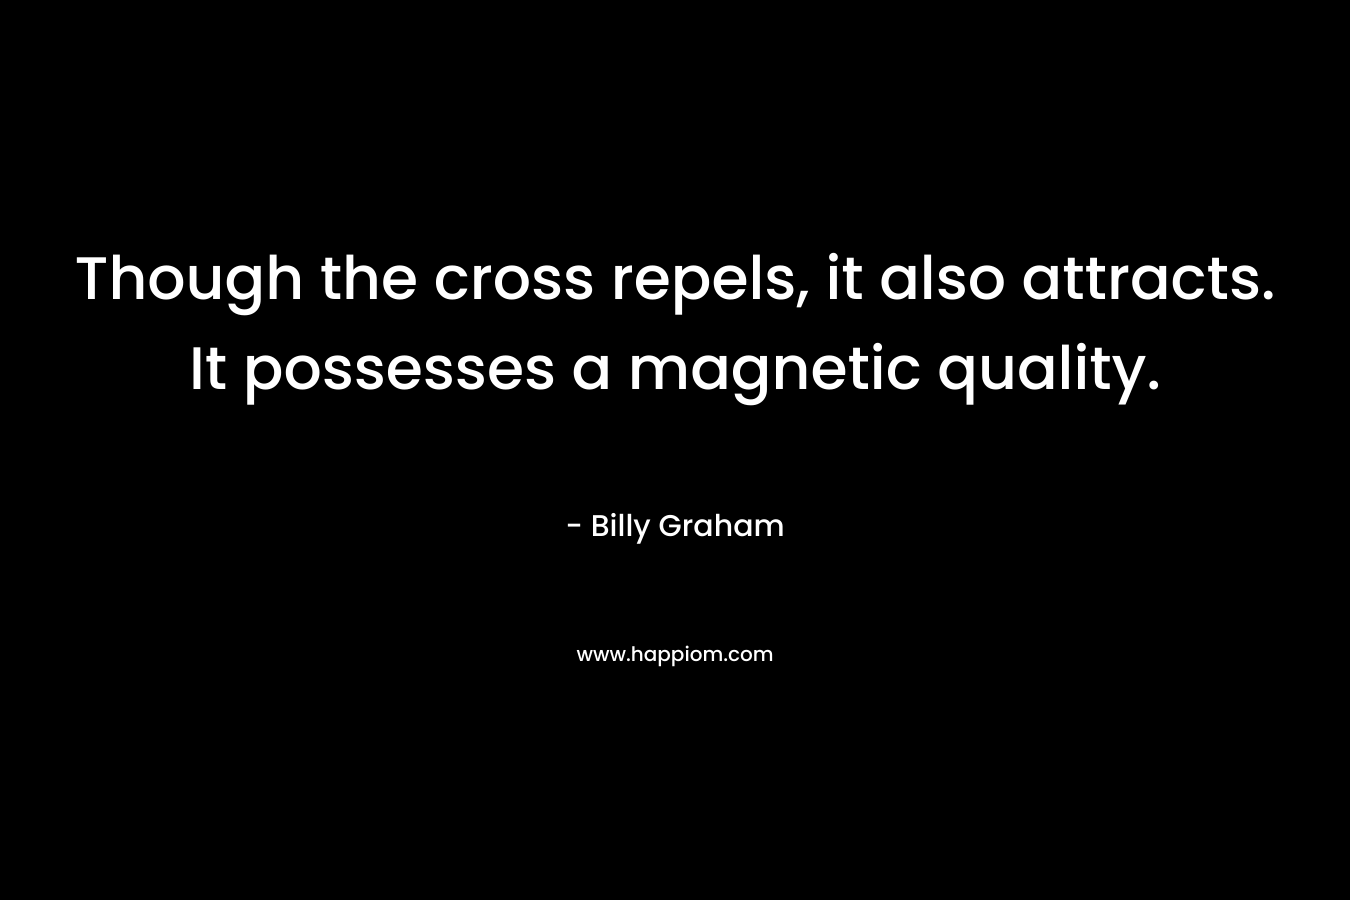 Though the cross repels, it also attracts. It possesses a magnetic quality.